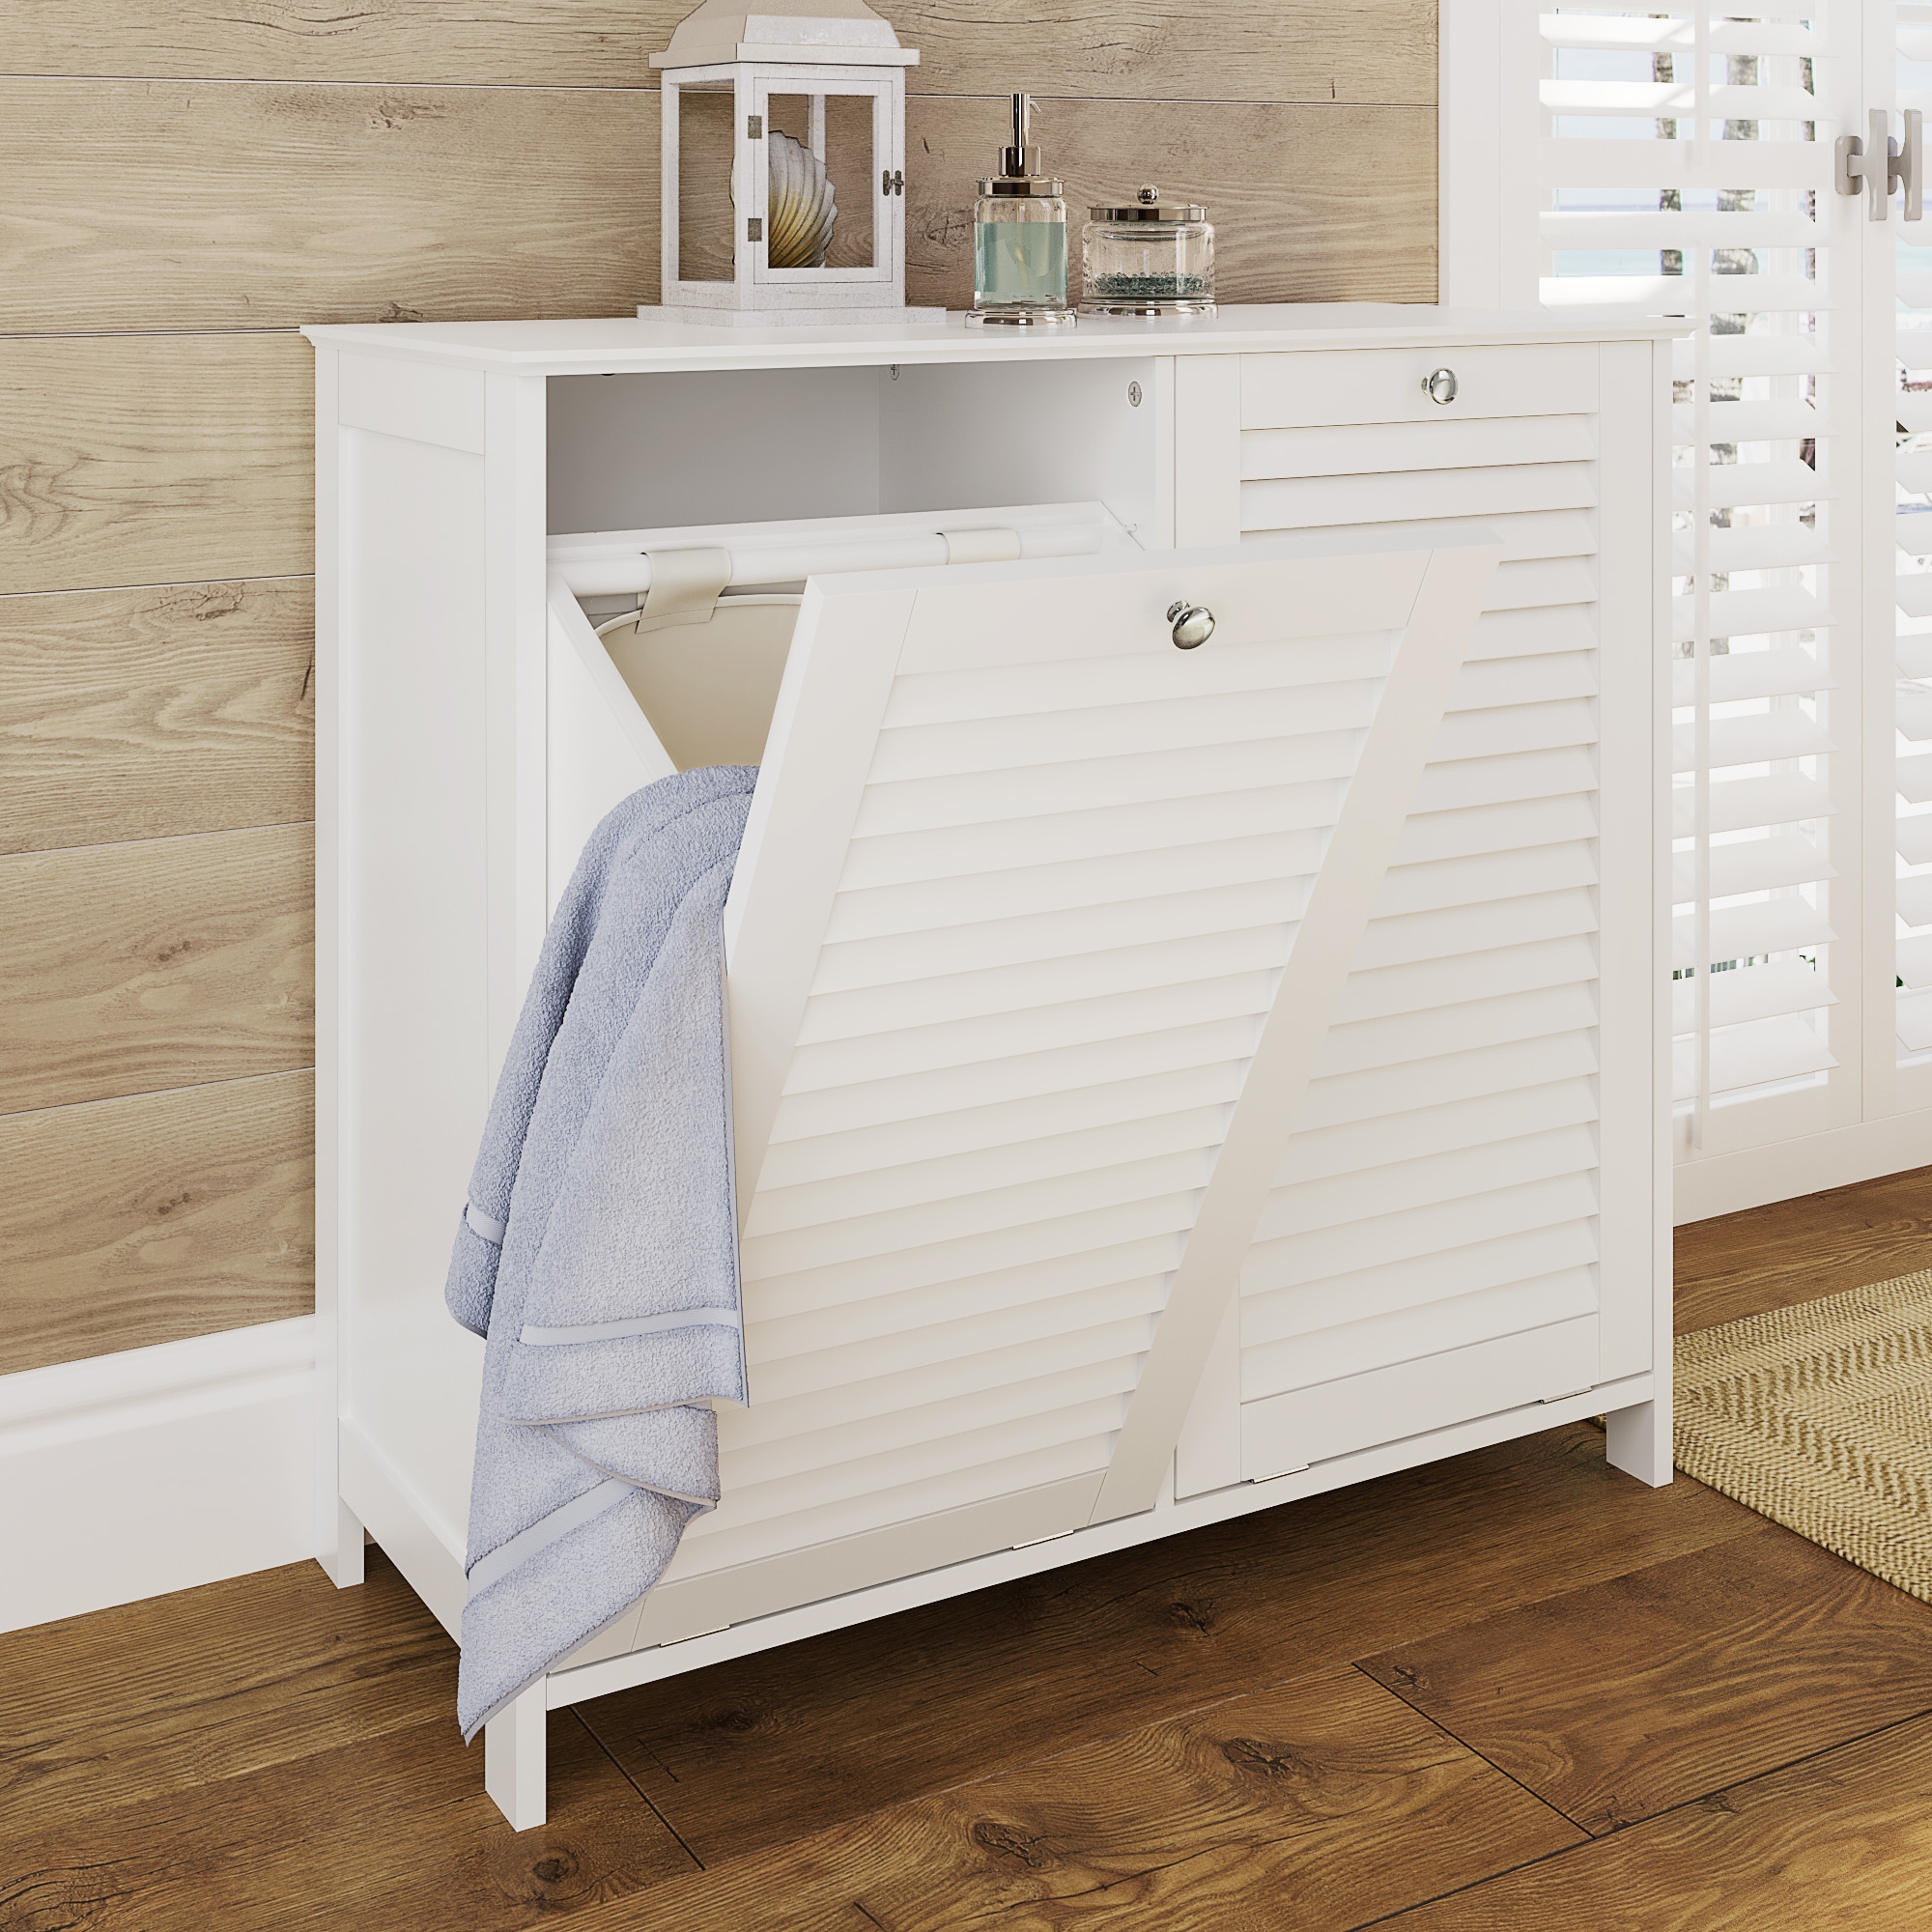 Linen Cabinet With Laundry Hamper | lupon.gov.ph